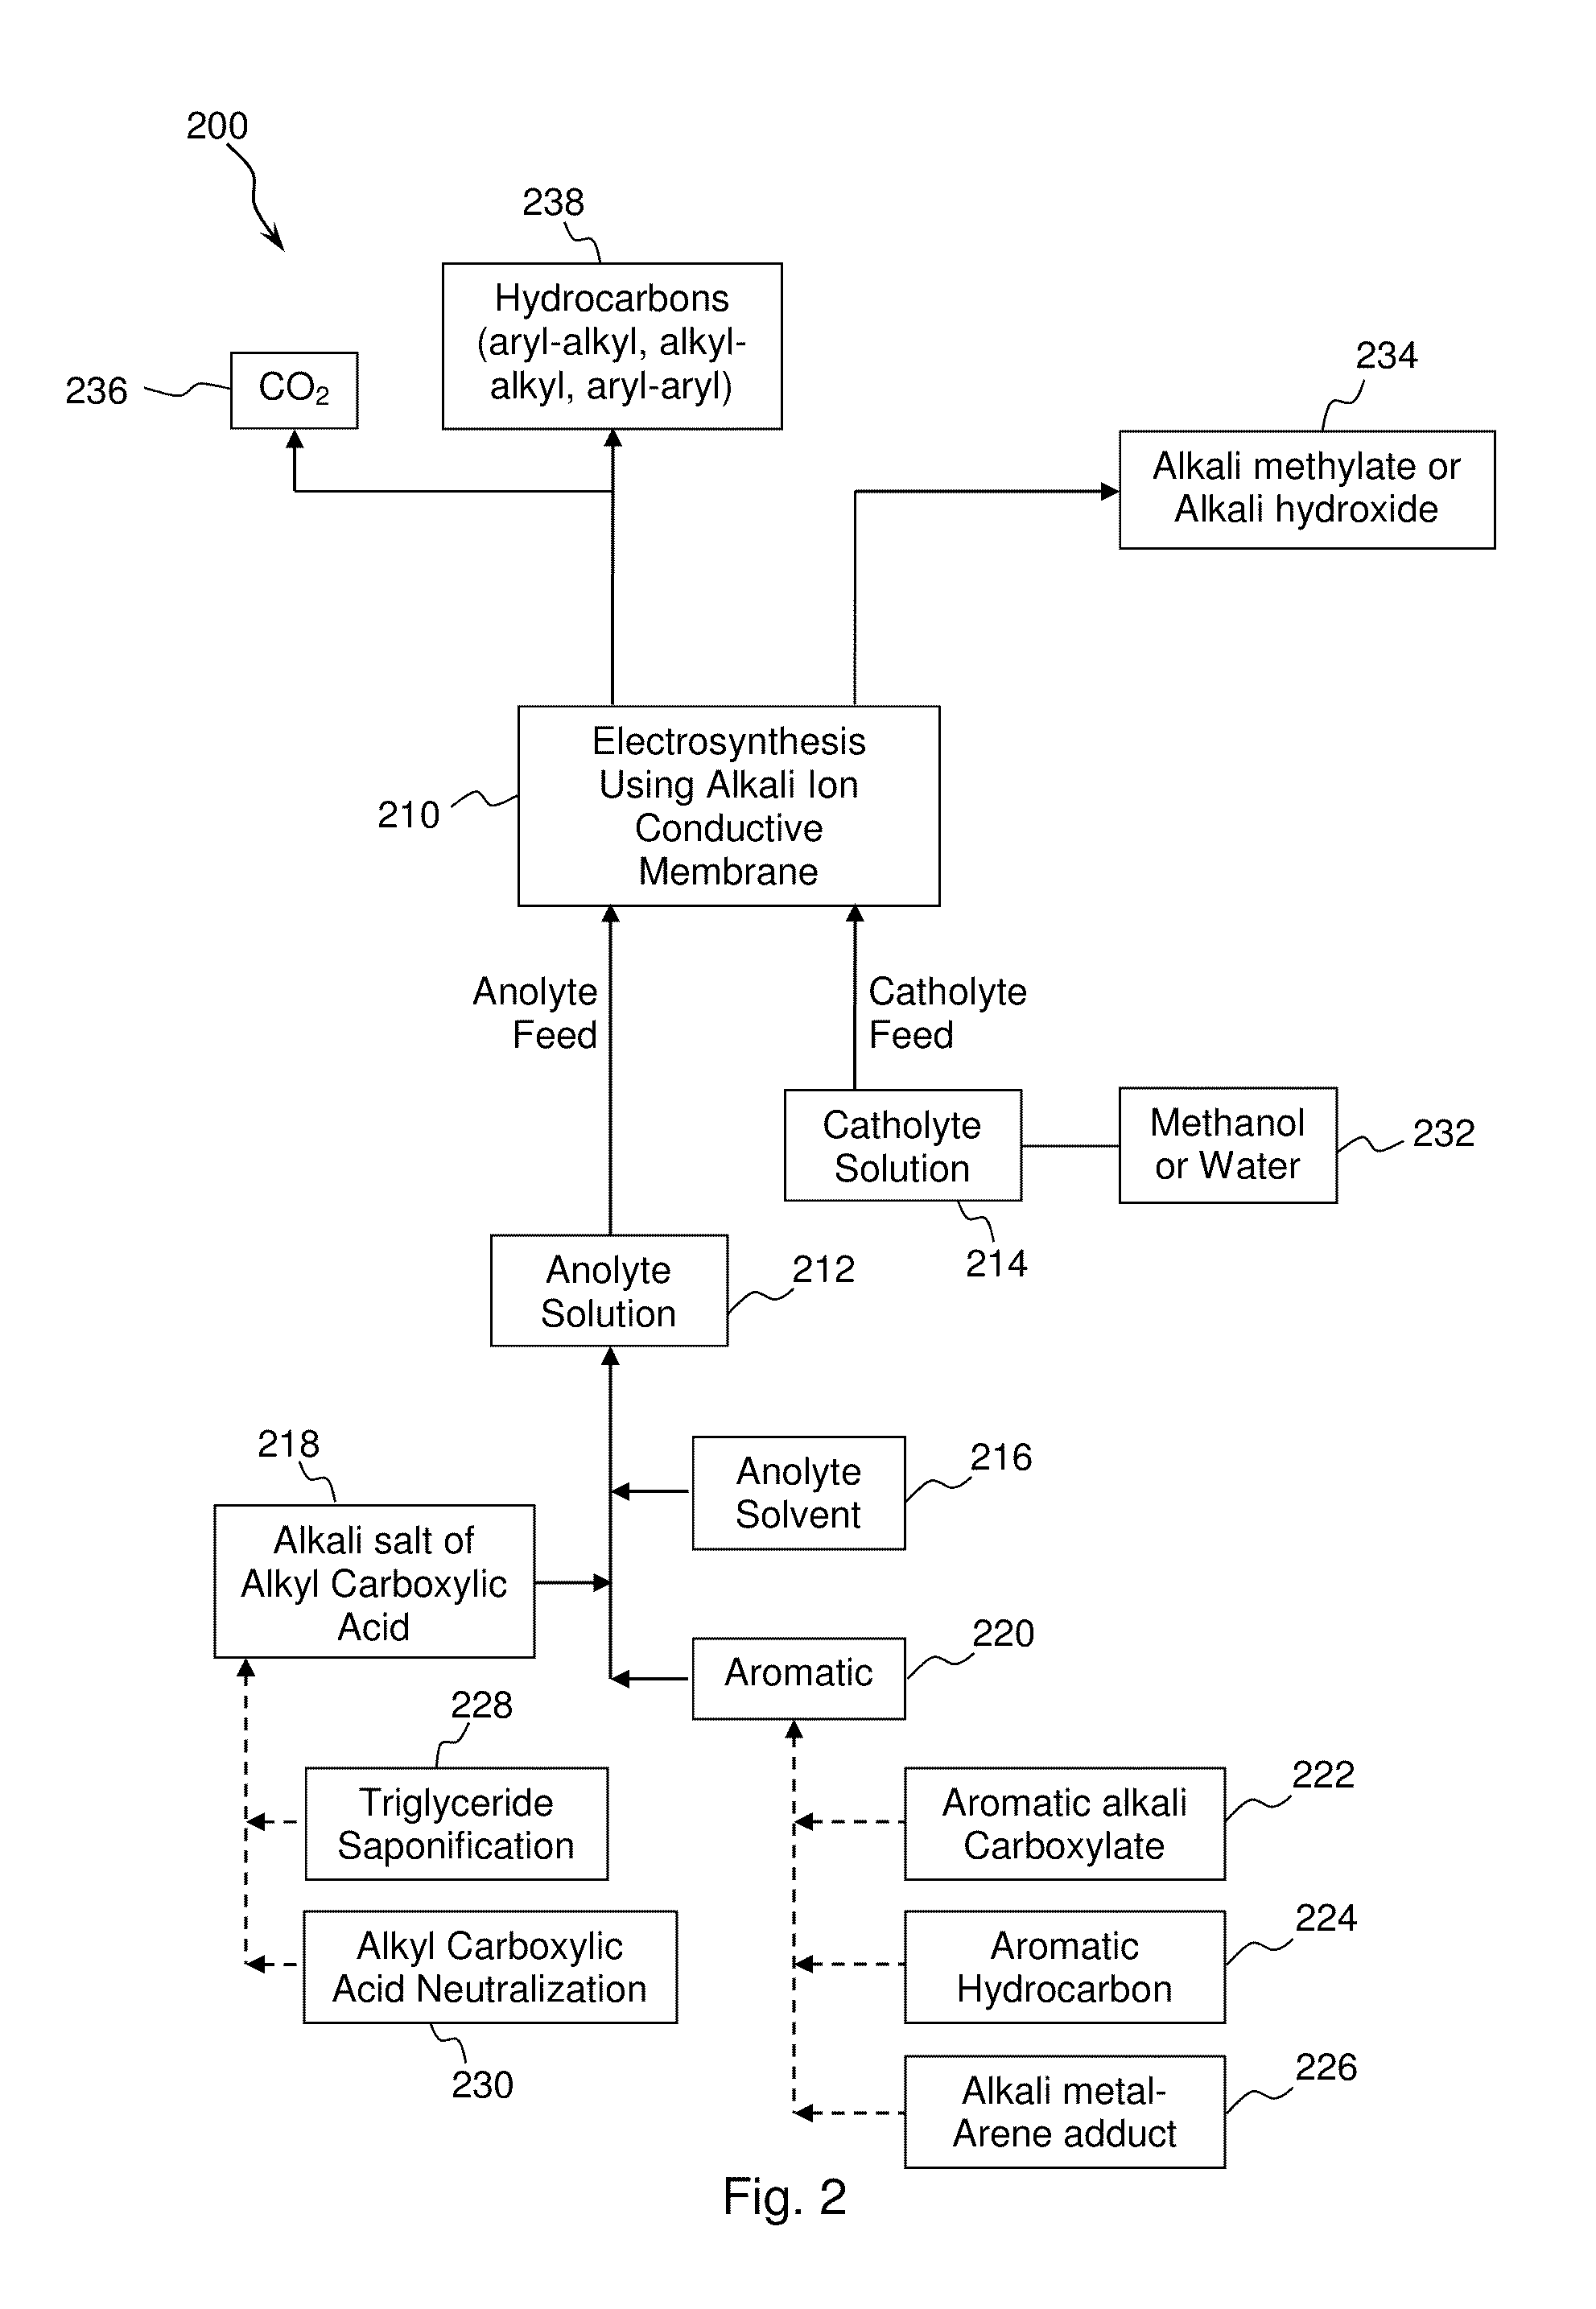 Electrochemical synthesis of aryl-alkyl surfacant precursor